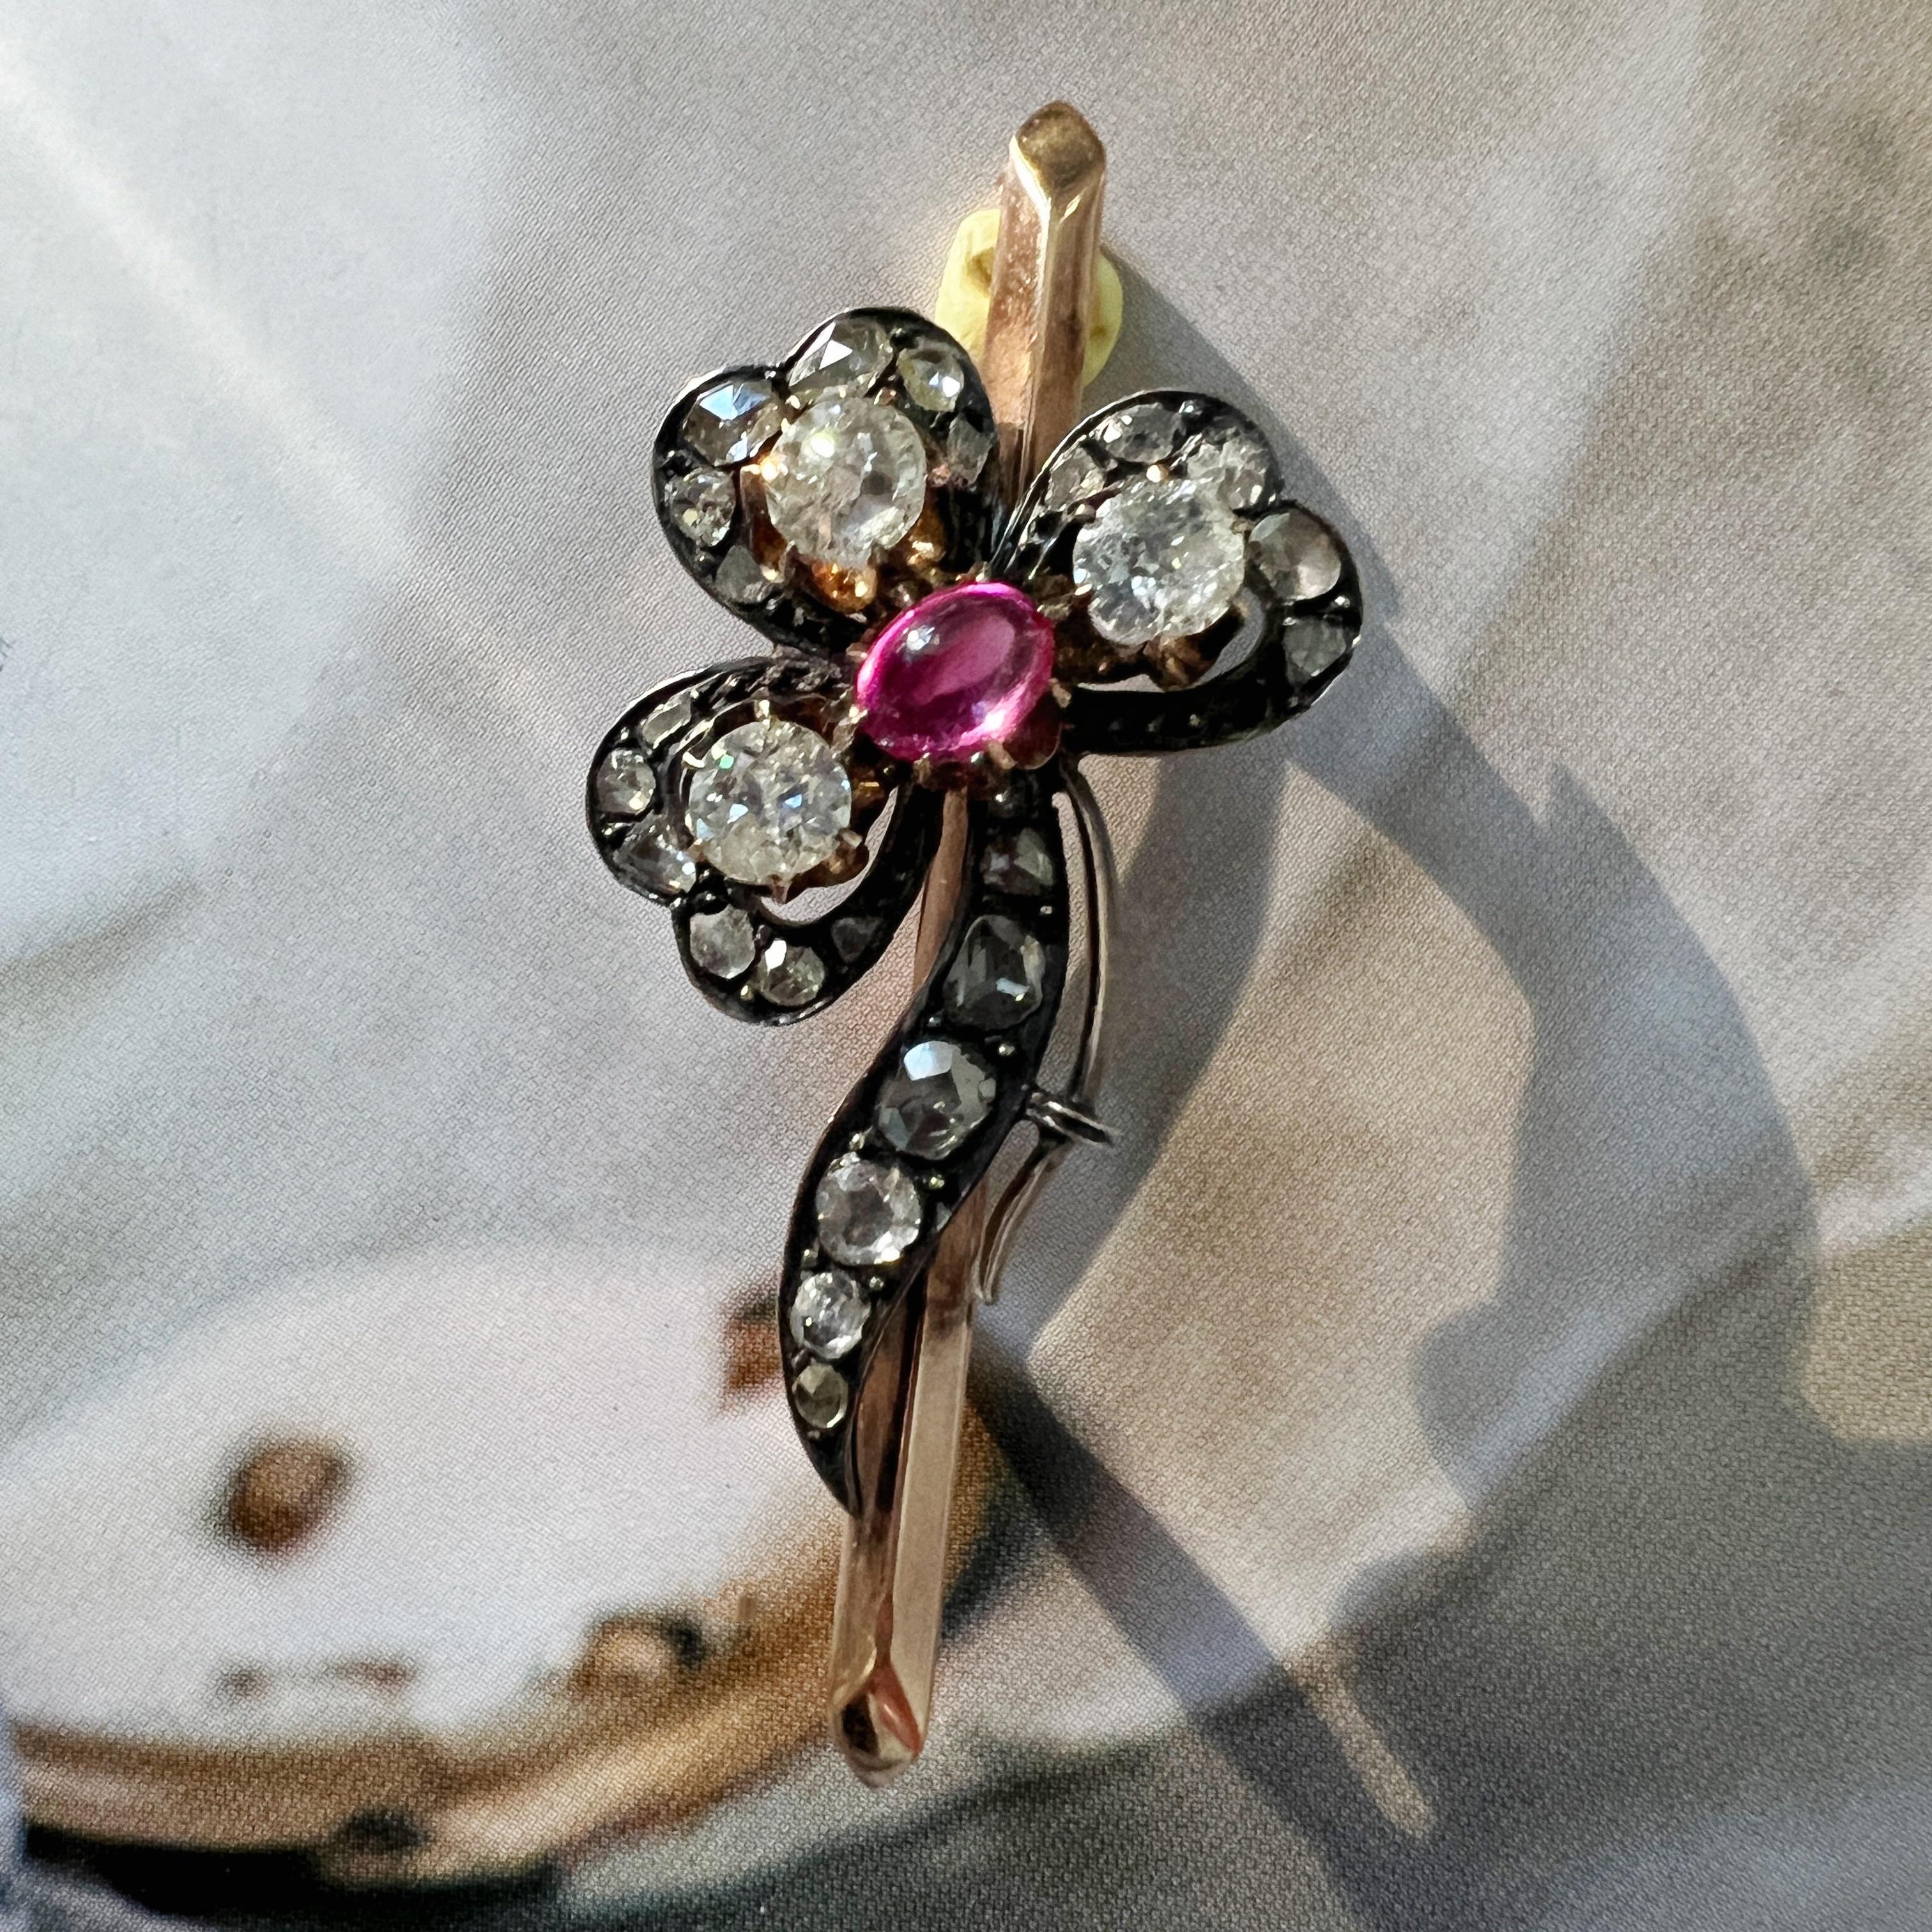 For sale a Victorian era 14K gold brooch, featuring a delicate three-leaf shamrock.

At the heart of the shamrock lies a vivid purplish-red ruby cabochon, radiating a rich and captivating hue. Surrounding the ruby are three old mine cut diamonds.